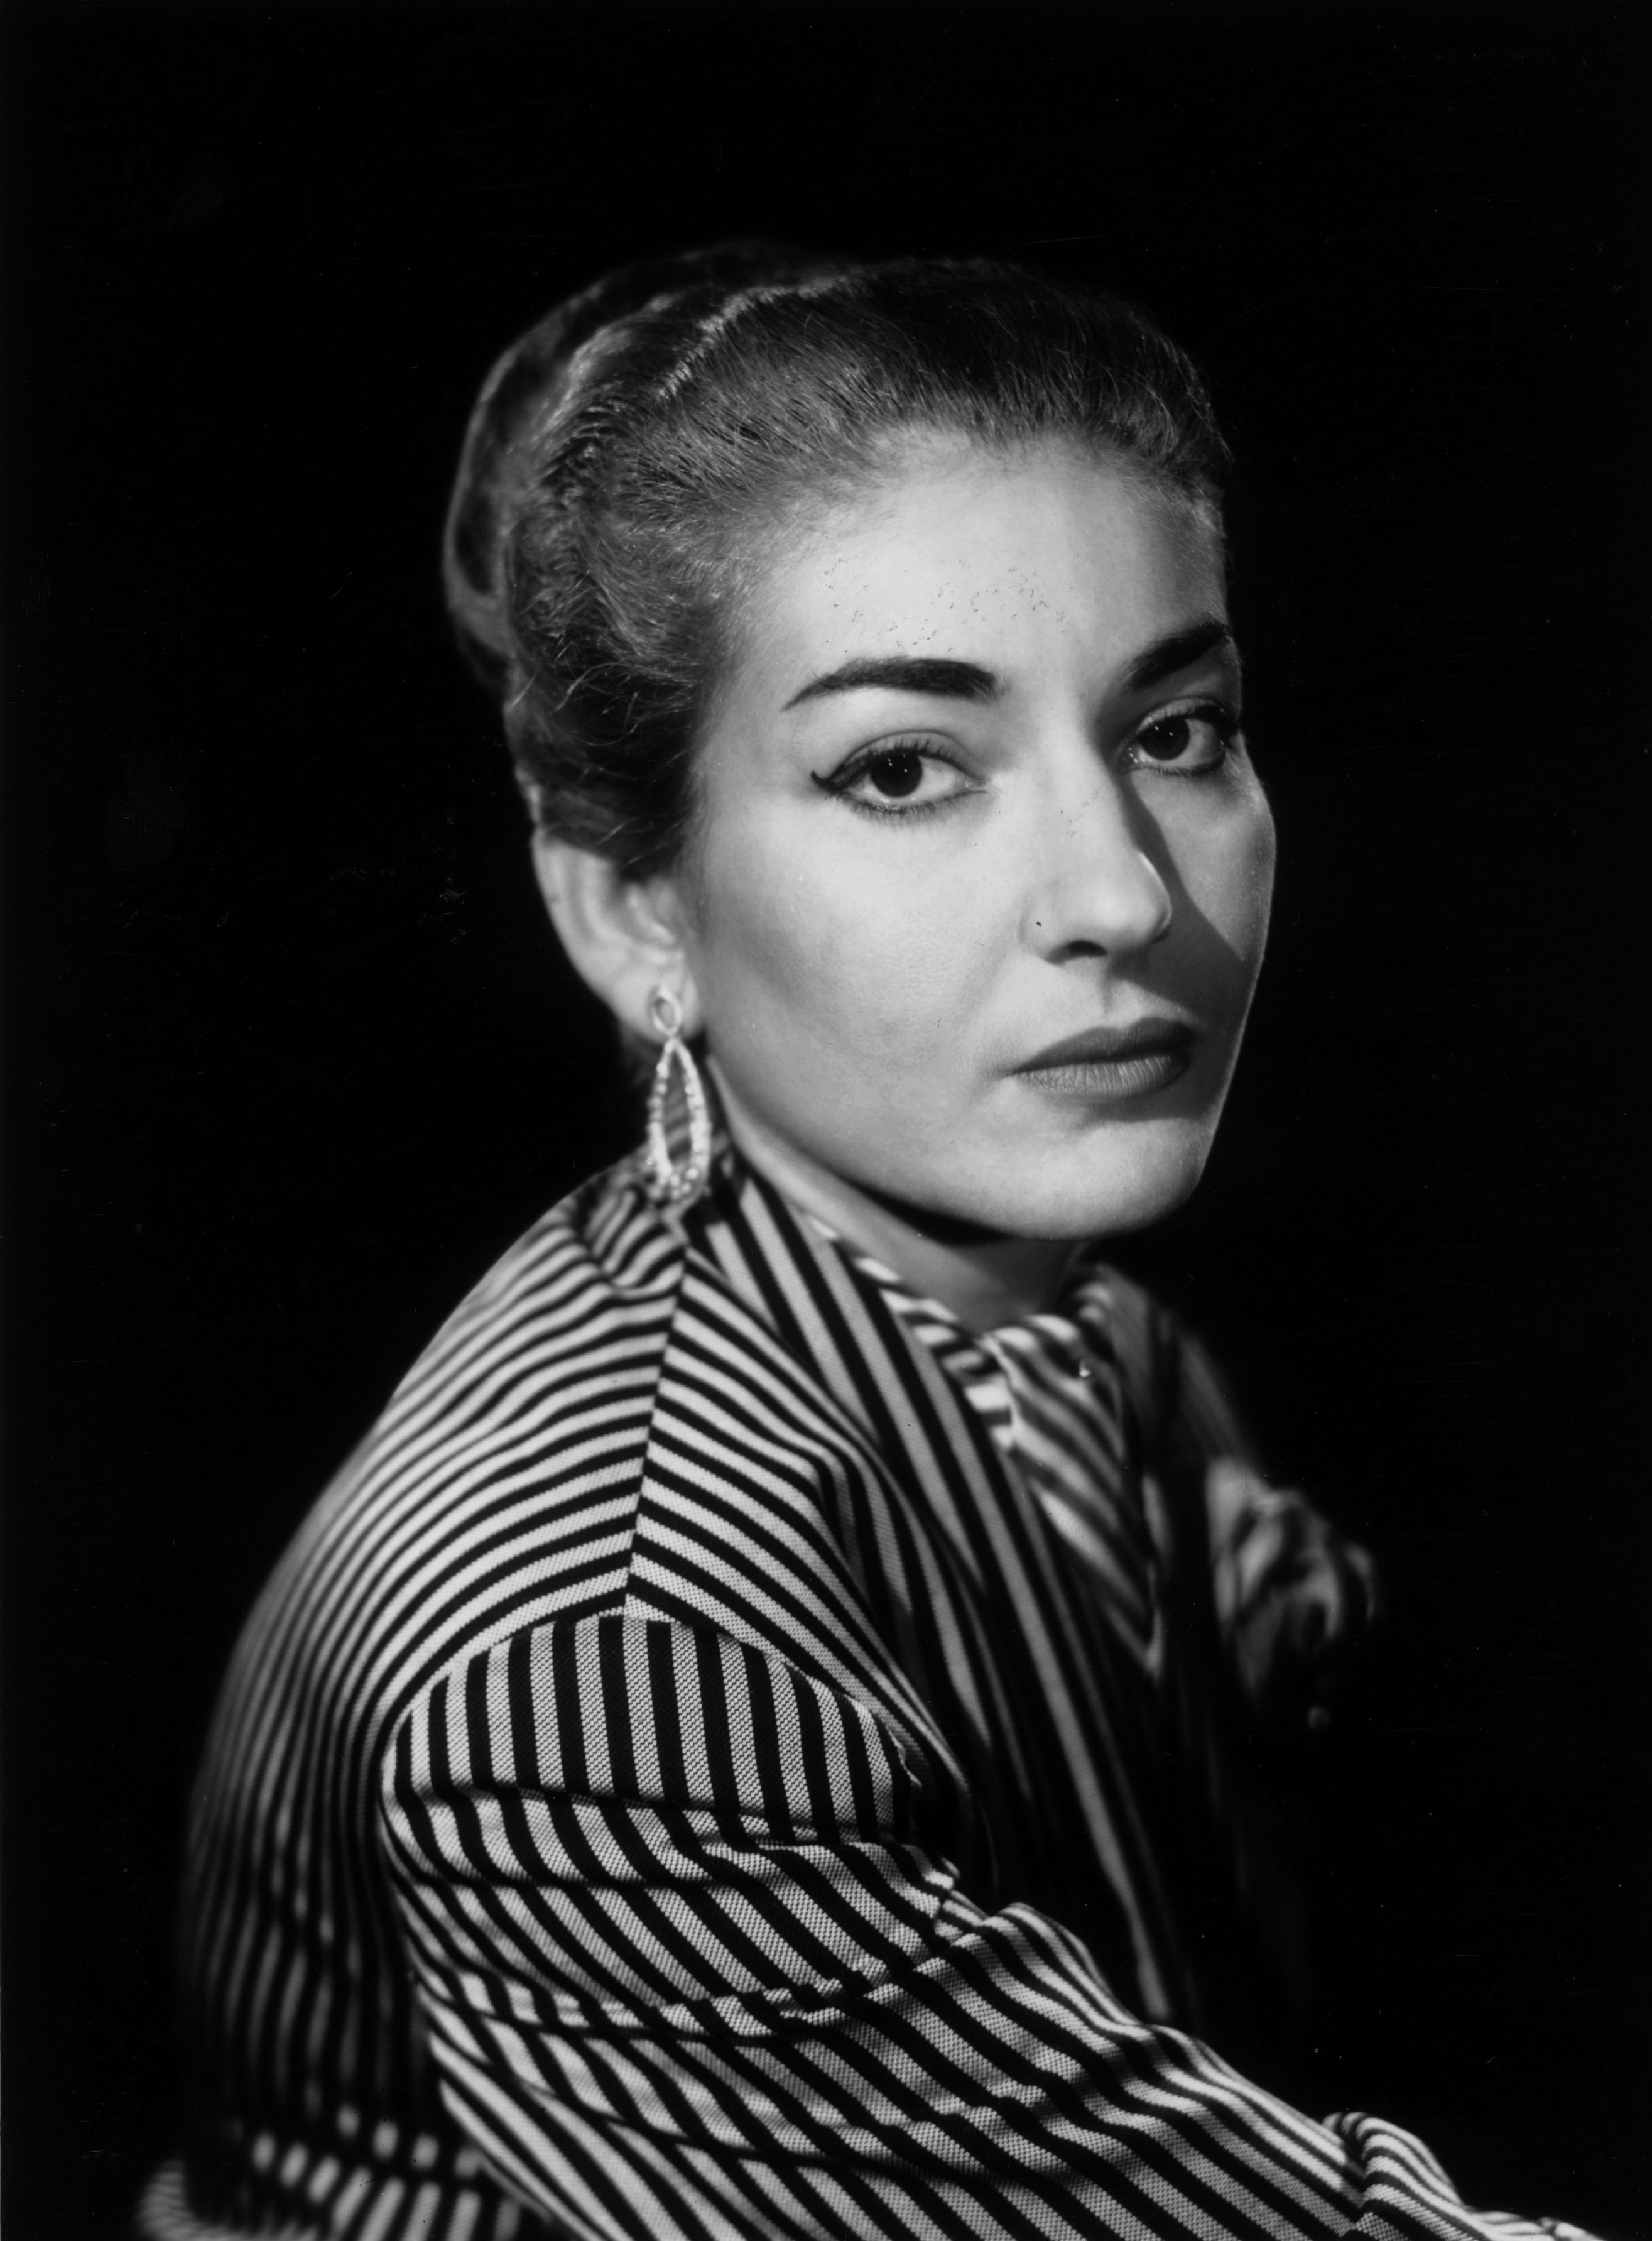 L'actrice Maria Callas (1923 - 1977). | Photo : Getty Images